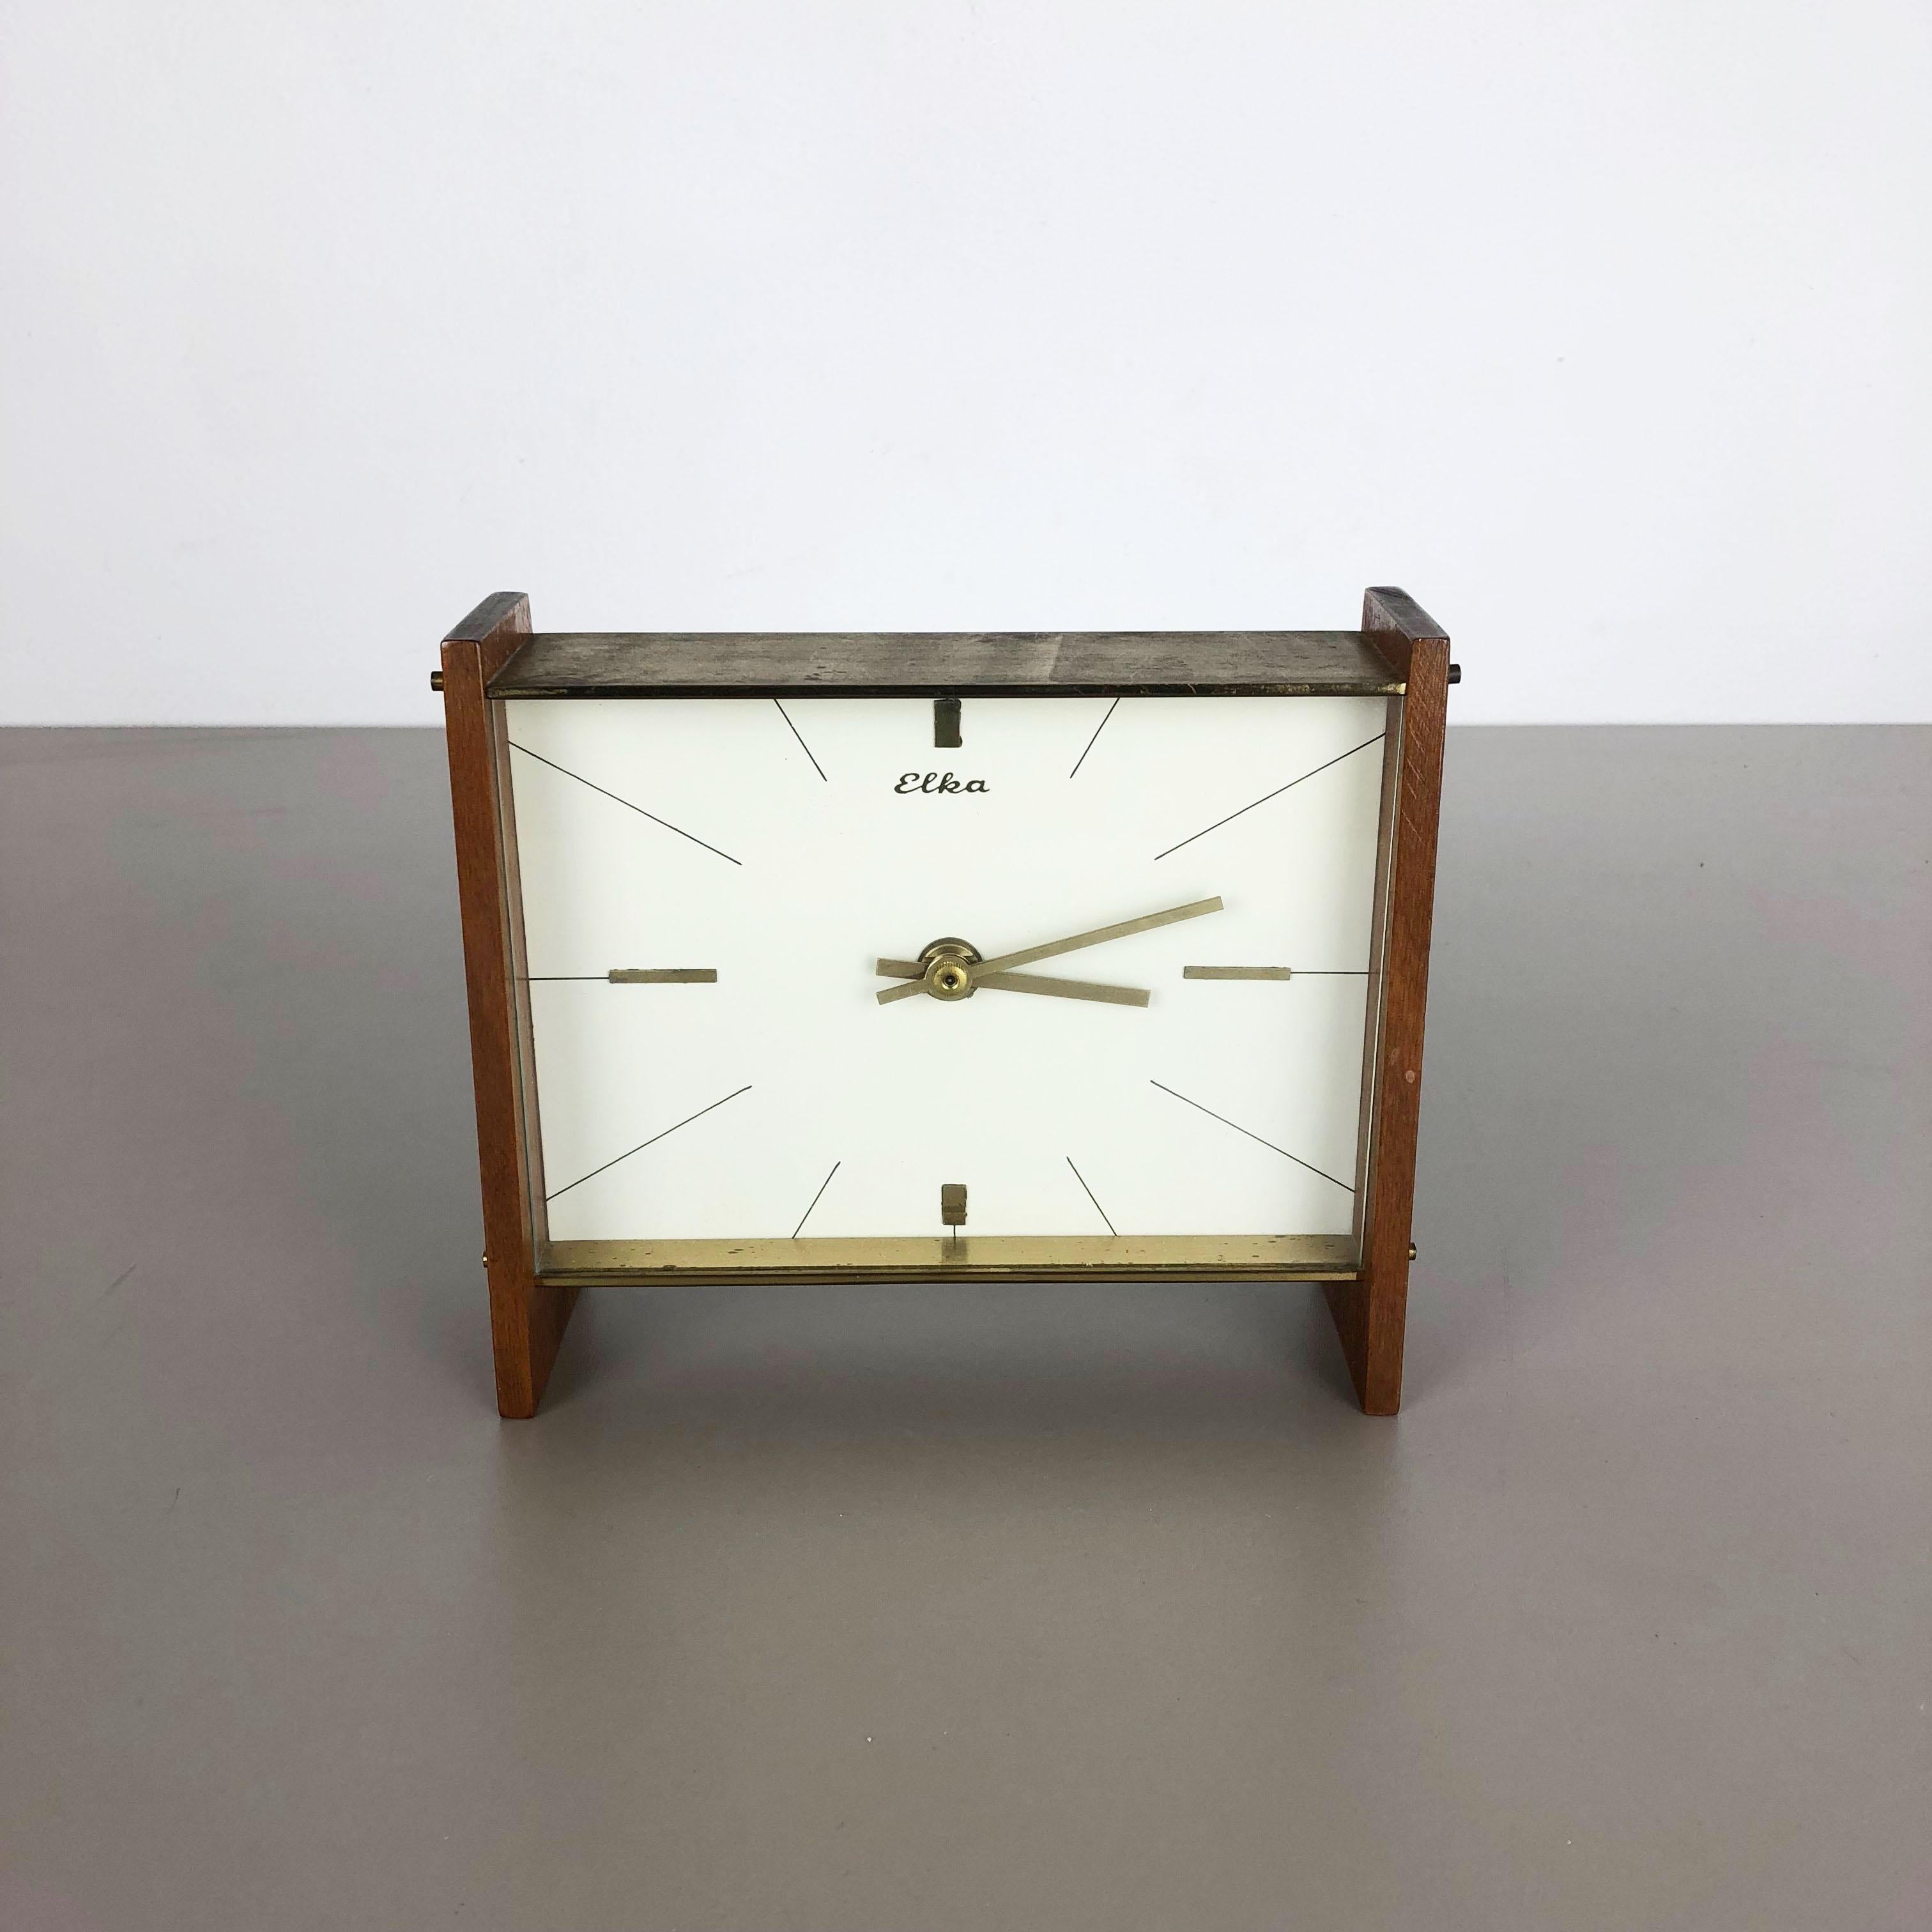 Article:

table clock



Origin:

Germany


Producer:

ELKA


Age:

1960s



Description:

this original wooden table clock was produced in the 1960s by the premium clock producer ELKA in Germany. The clock is original